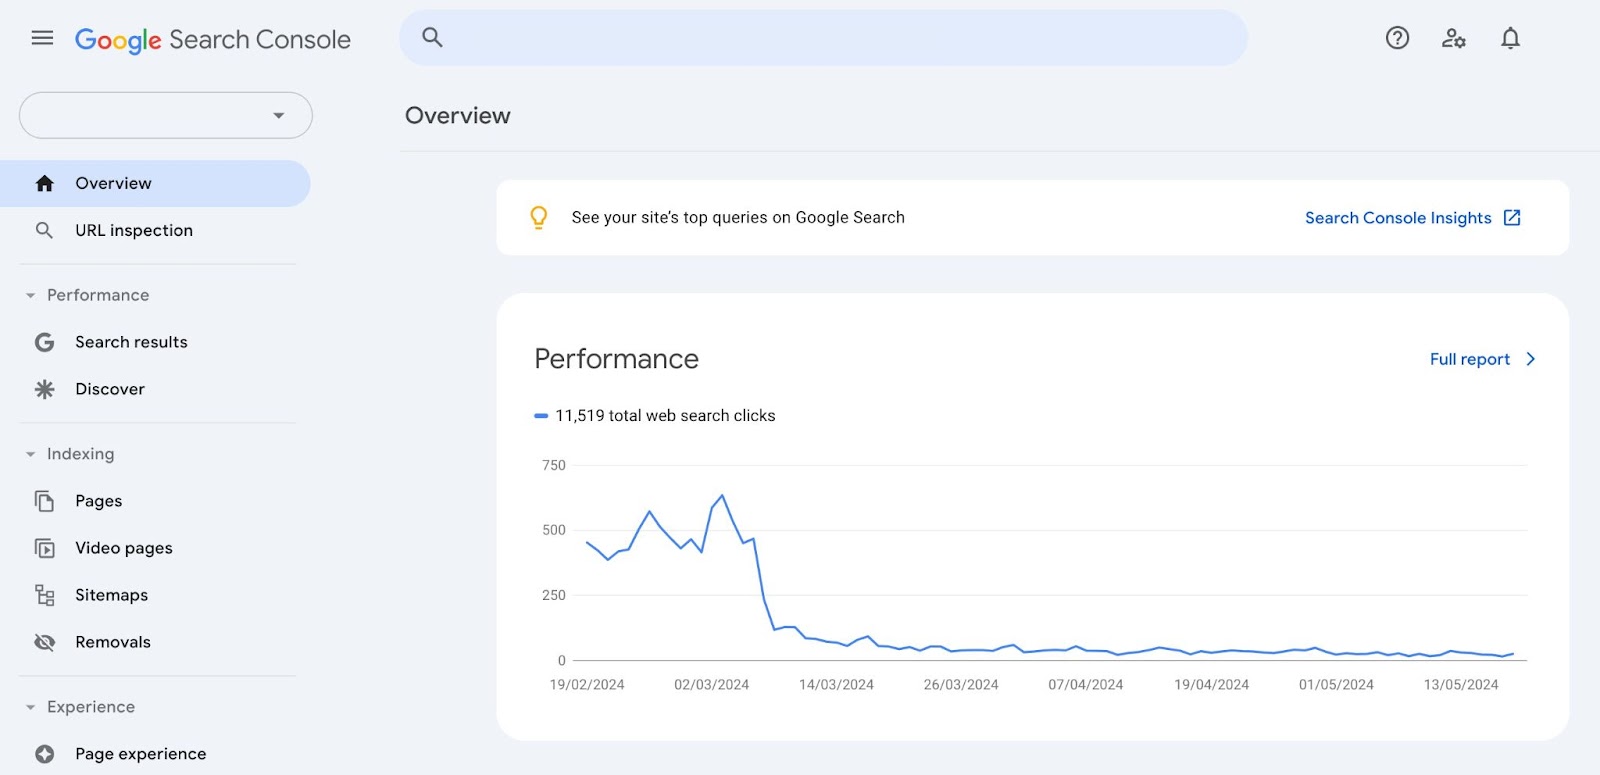 "Google Search Console" home showing descriptive analytics on website traffic, performance data, and issues.